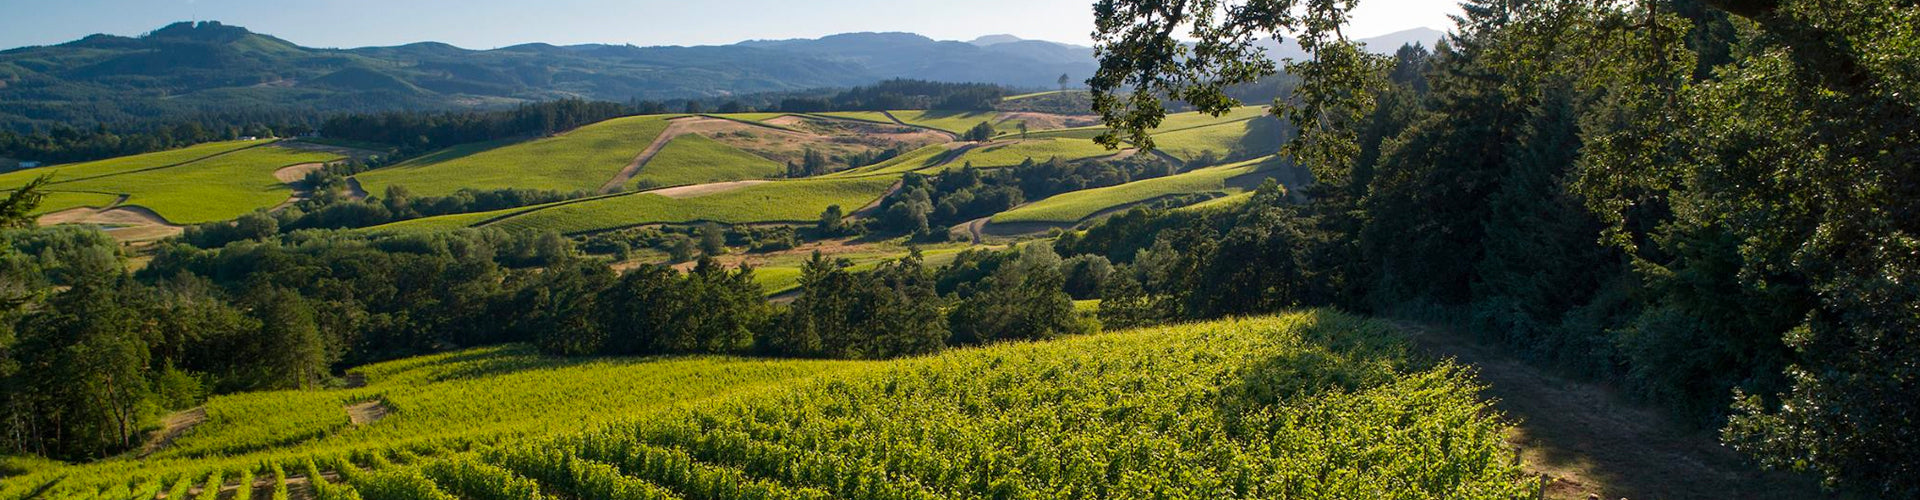 Résonance Vineyard located in the Yamhill-Carlton District AVA of Oregon's Willamette Valley